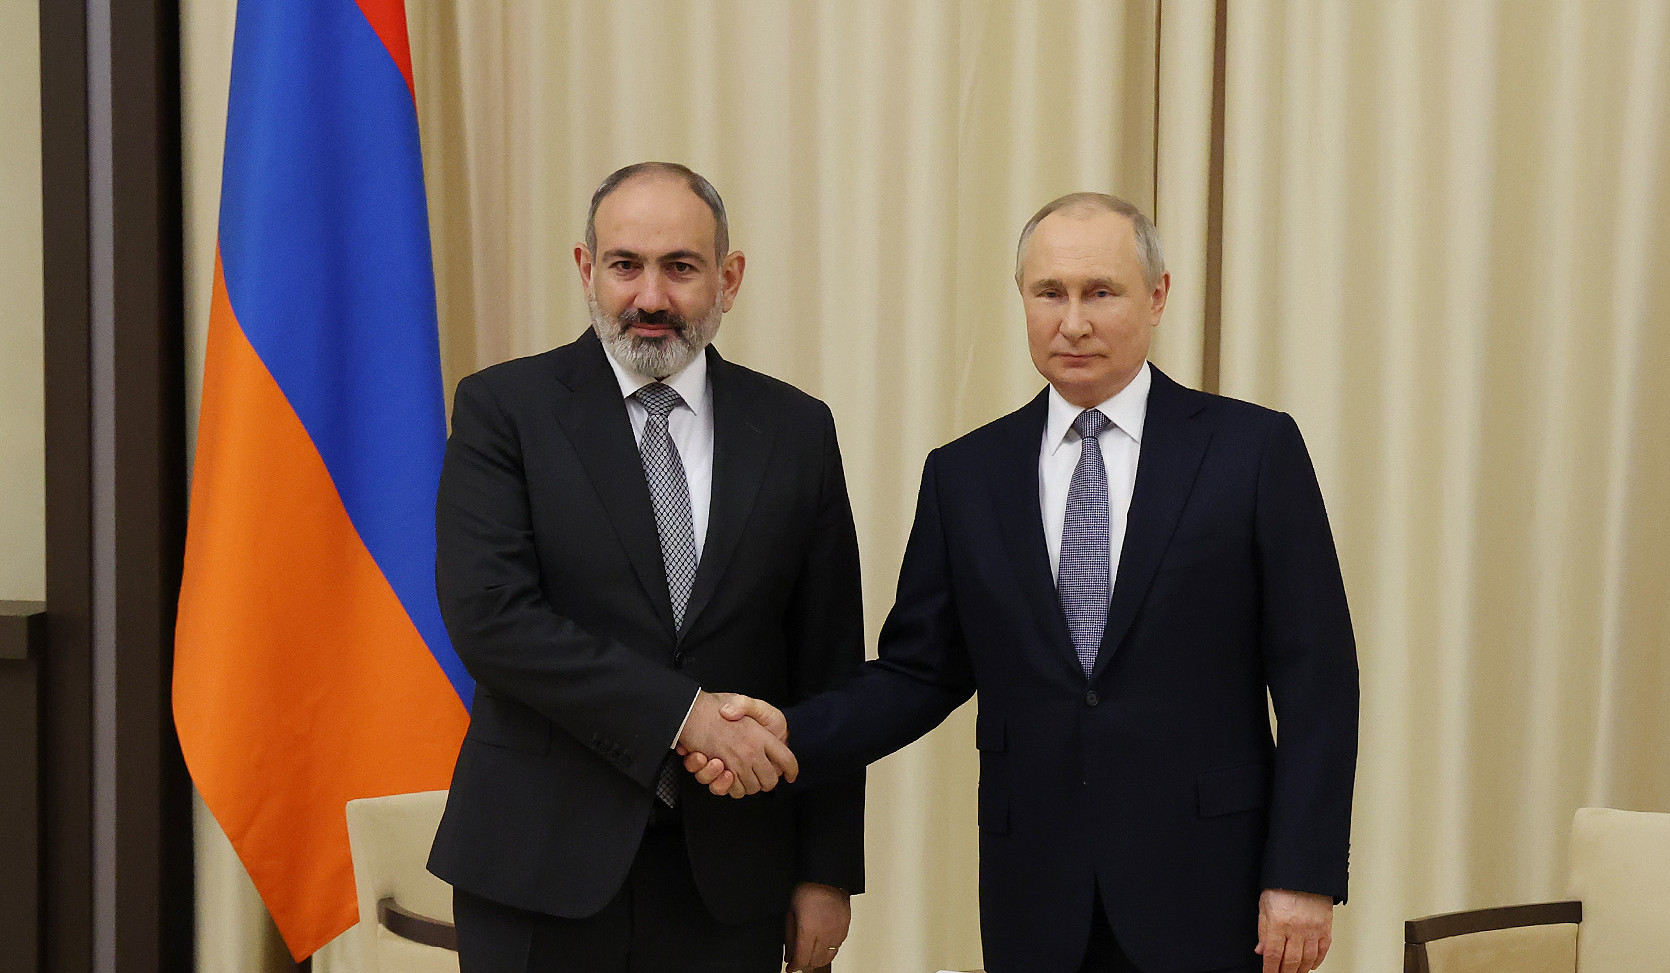 Nikol Pashinyan-Vladimir Putin meeting taking place in Moscow: Armenia, Russia sign a number of documents